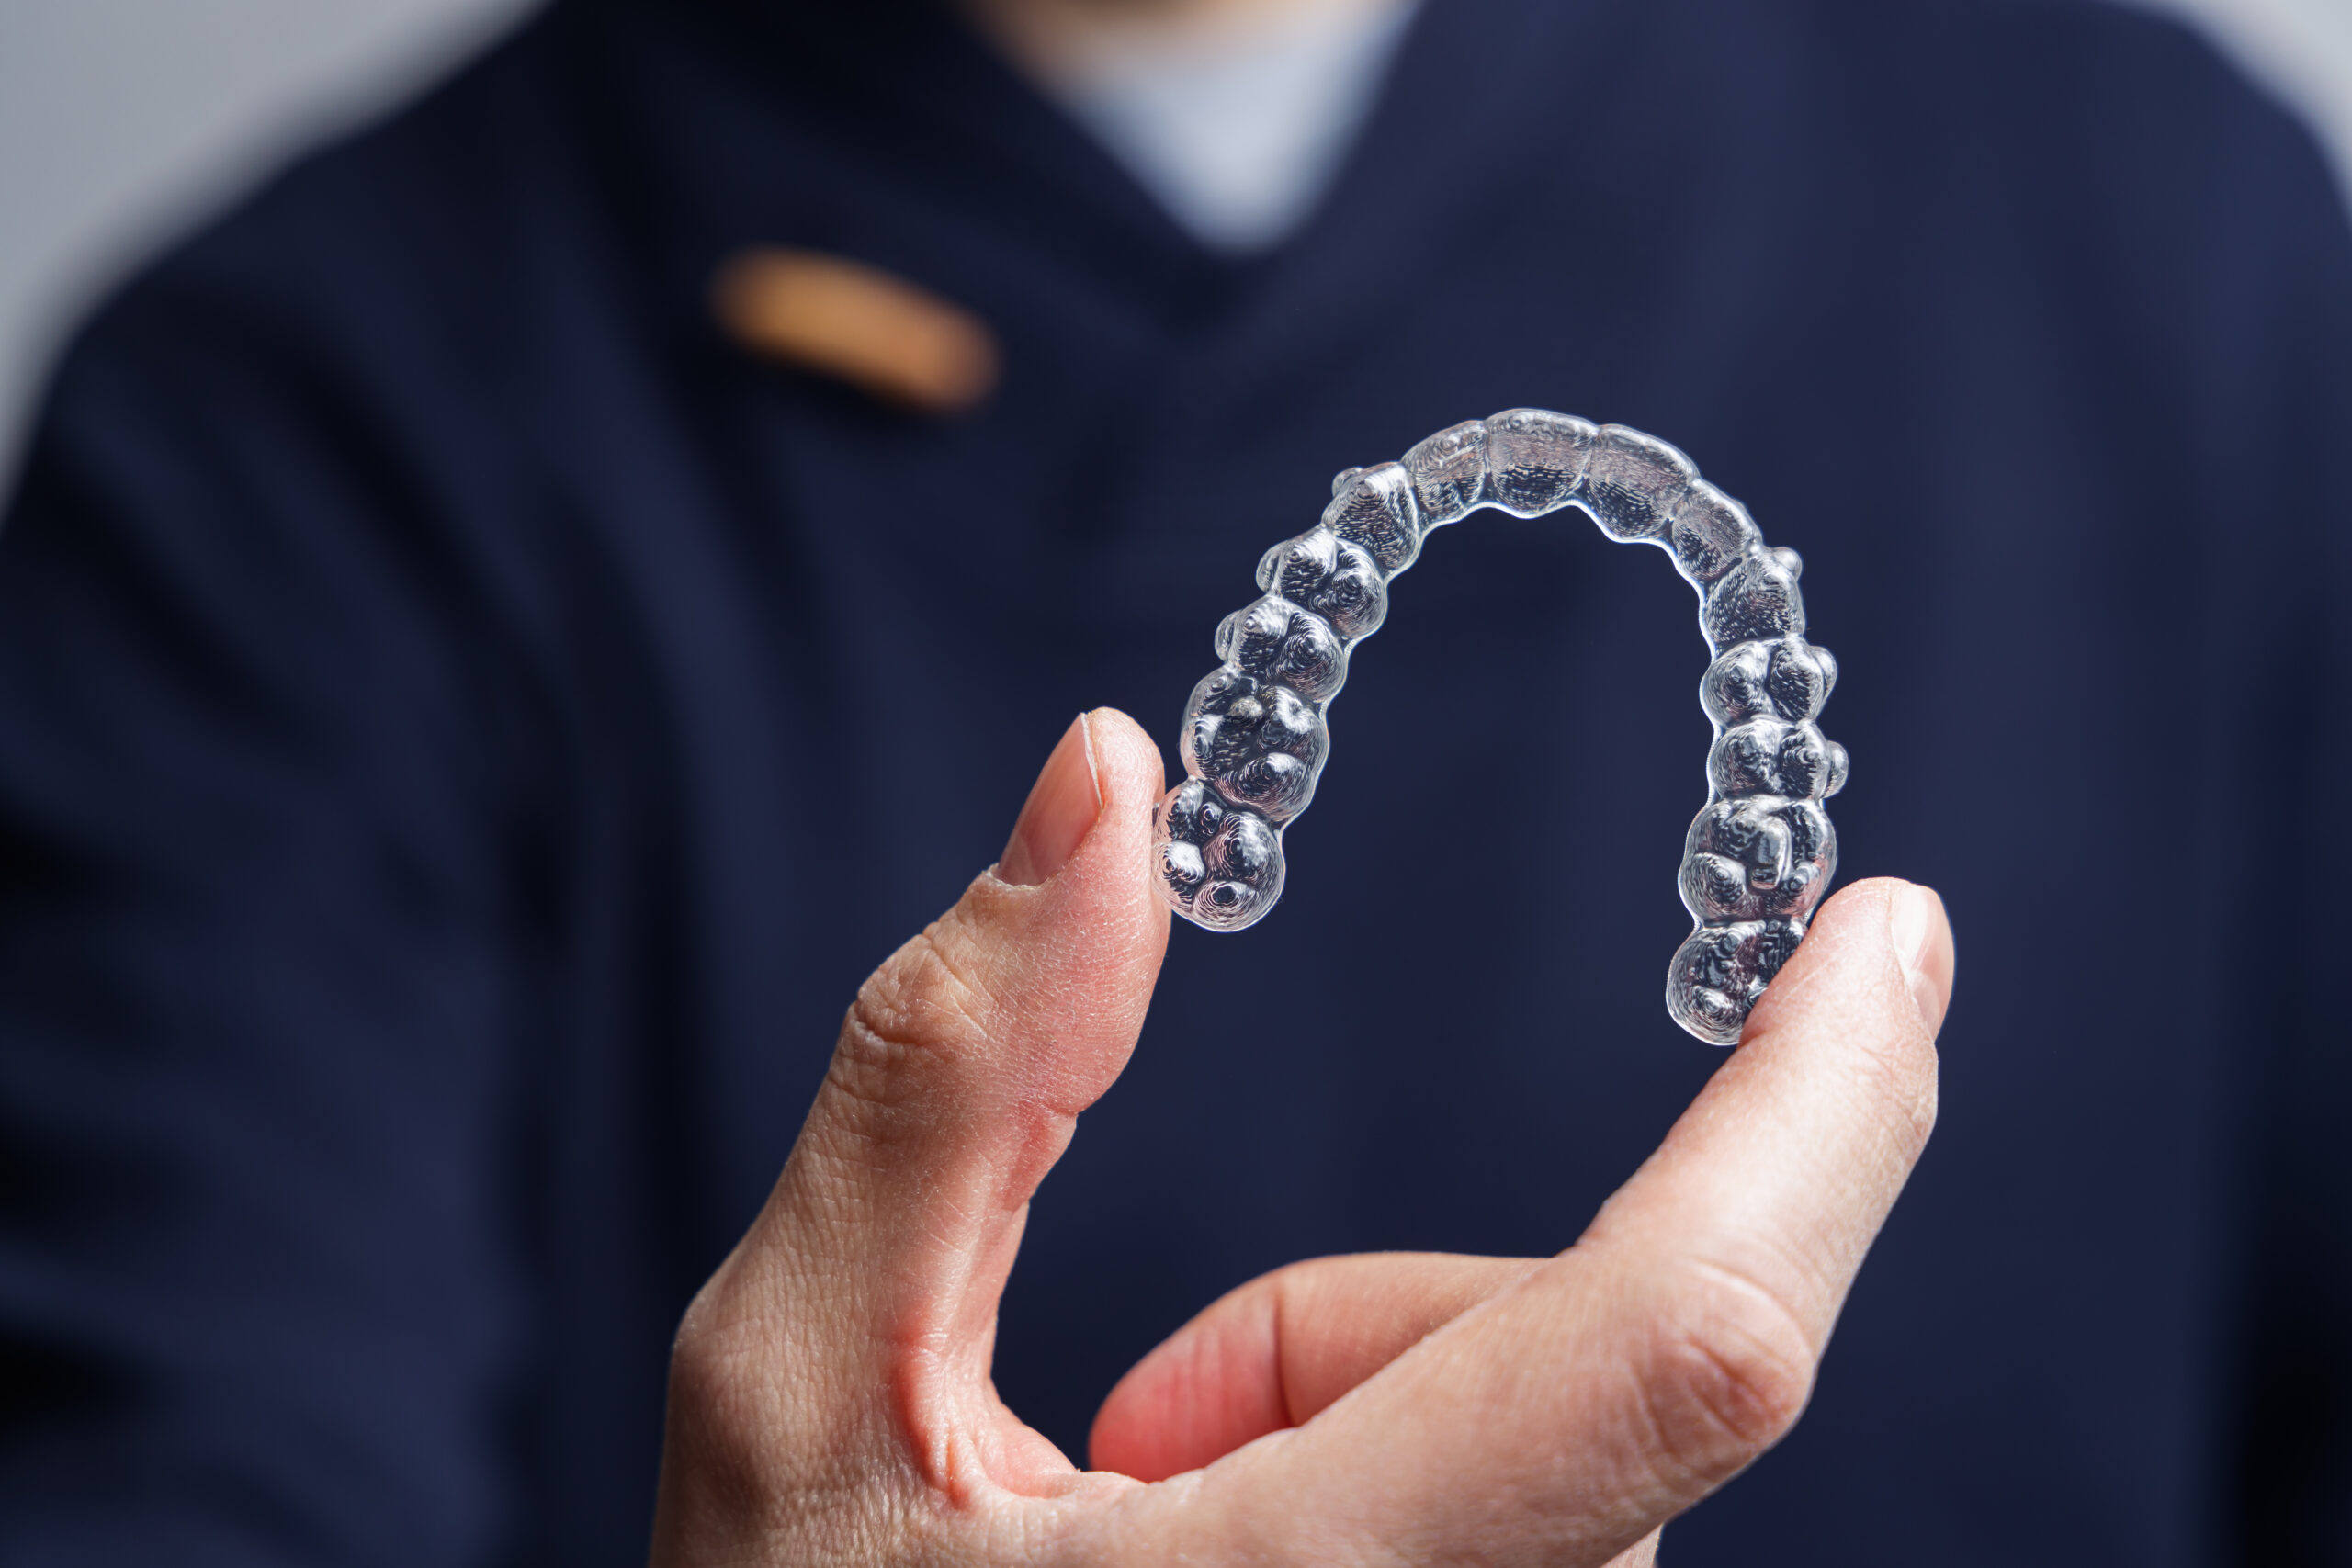 How Does Invisalign Work?: 4 Common Myths About Invisalign